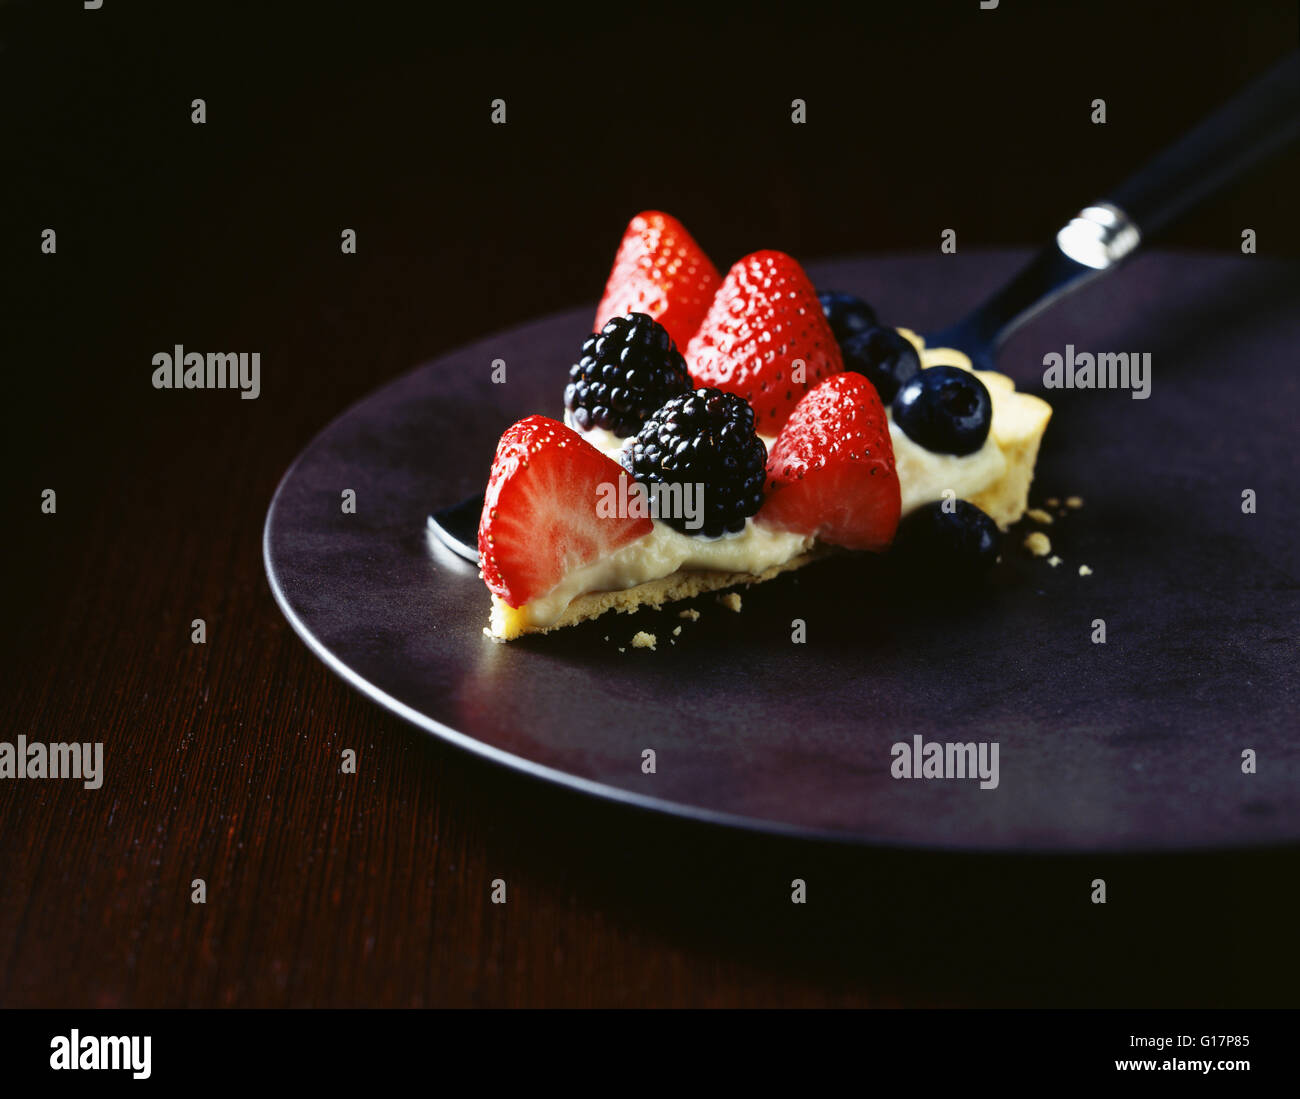 Slice of strawberry, raspberry and blueberry tart on plate Stock Photo